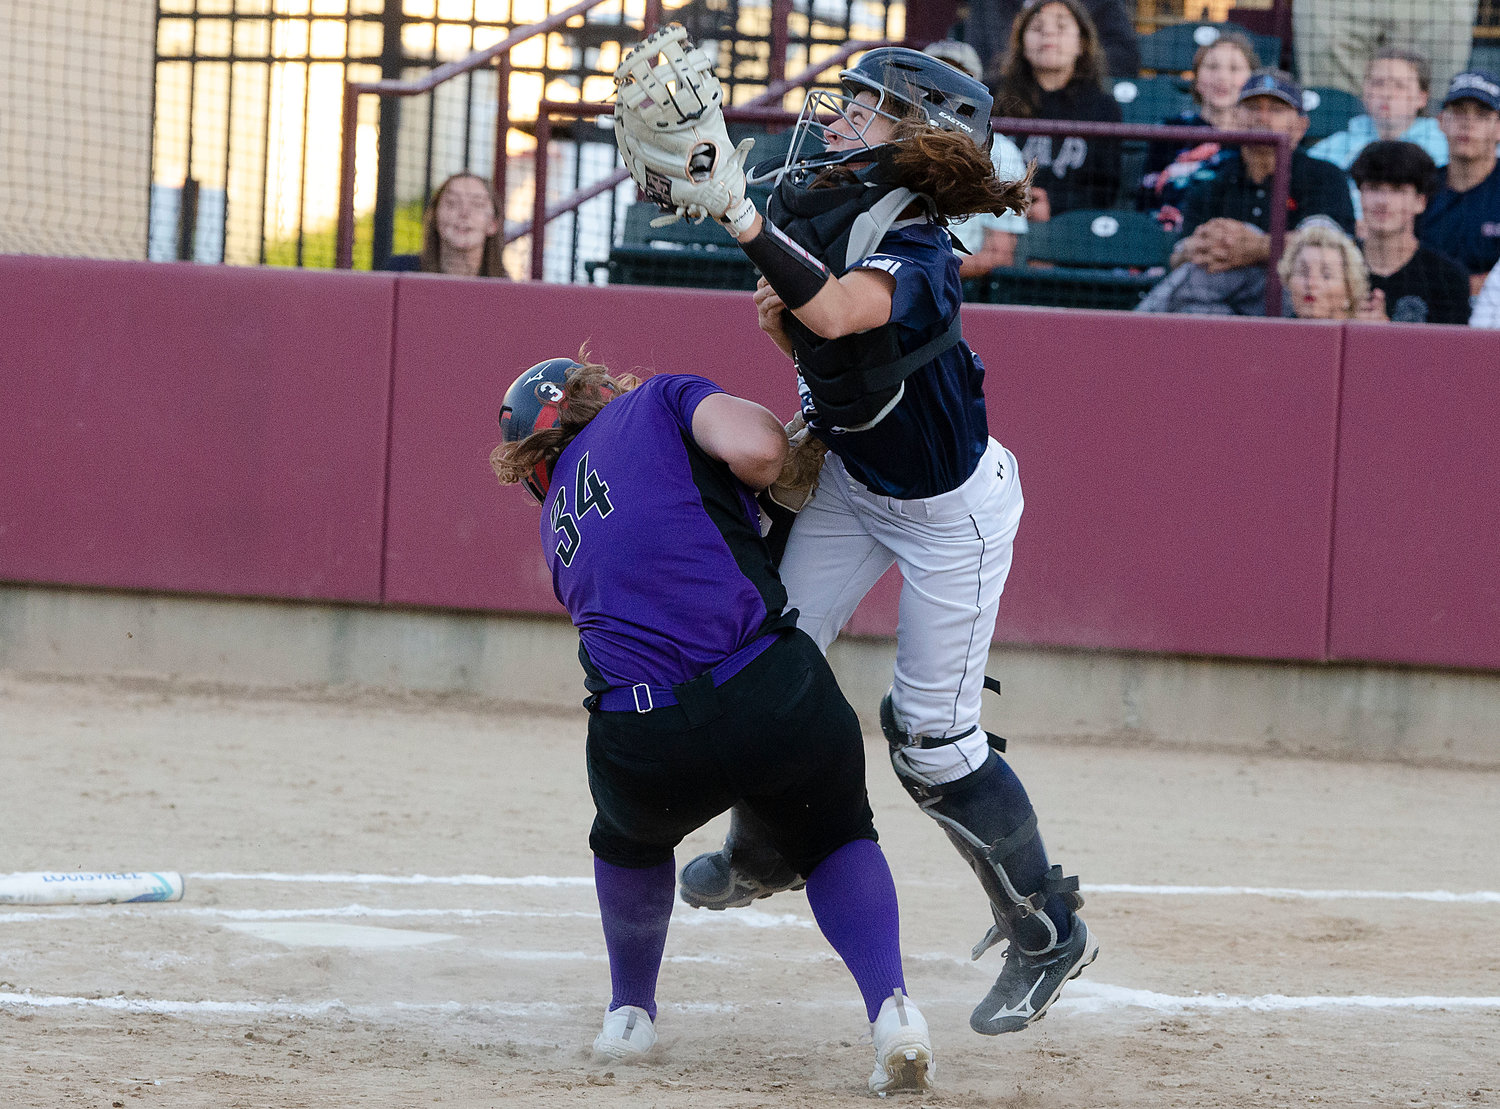 Grace Stephenson slams into the Broncos catcher Kaitlin Pristawa on her way to scoring the Huskies second run in the first inning.